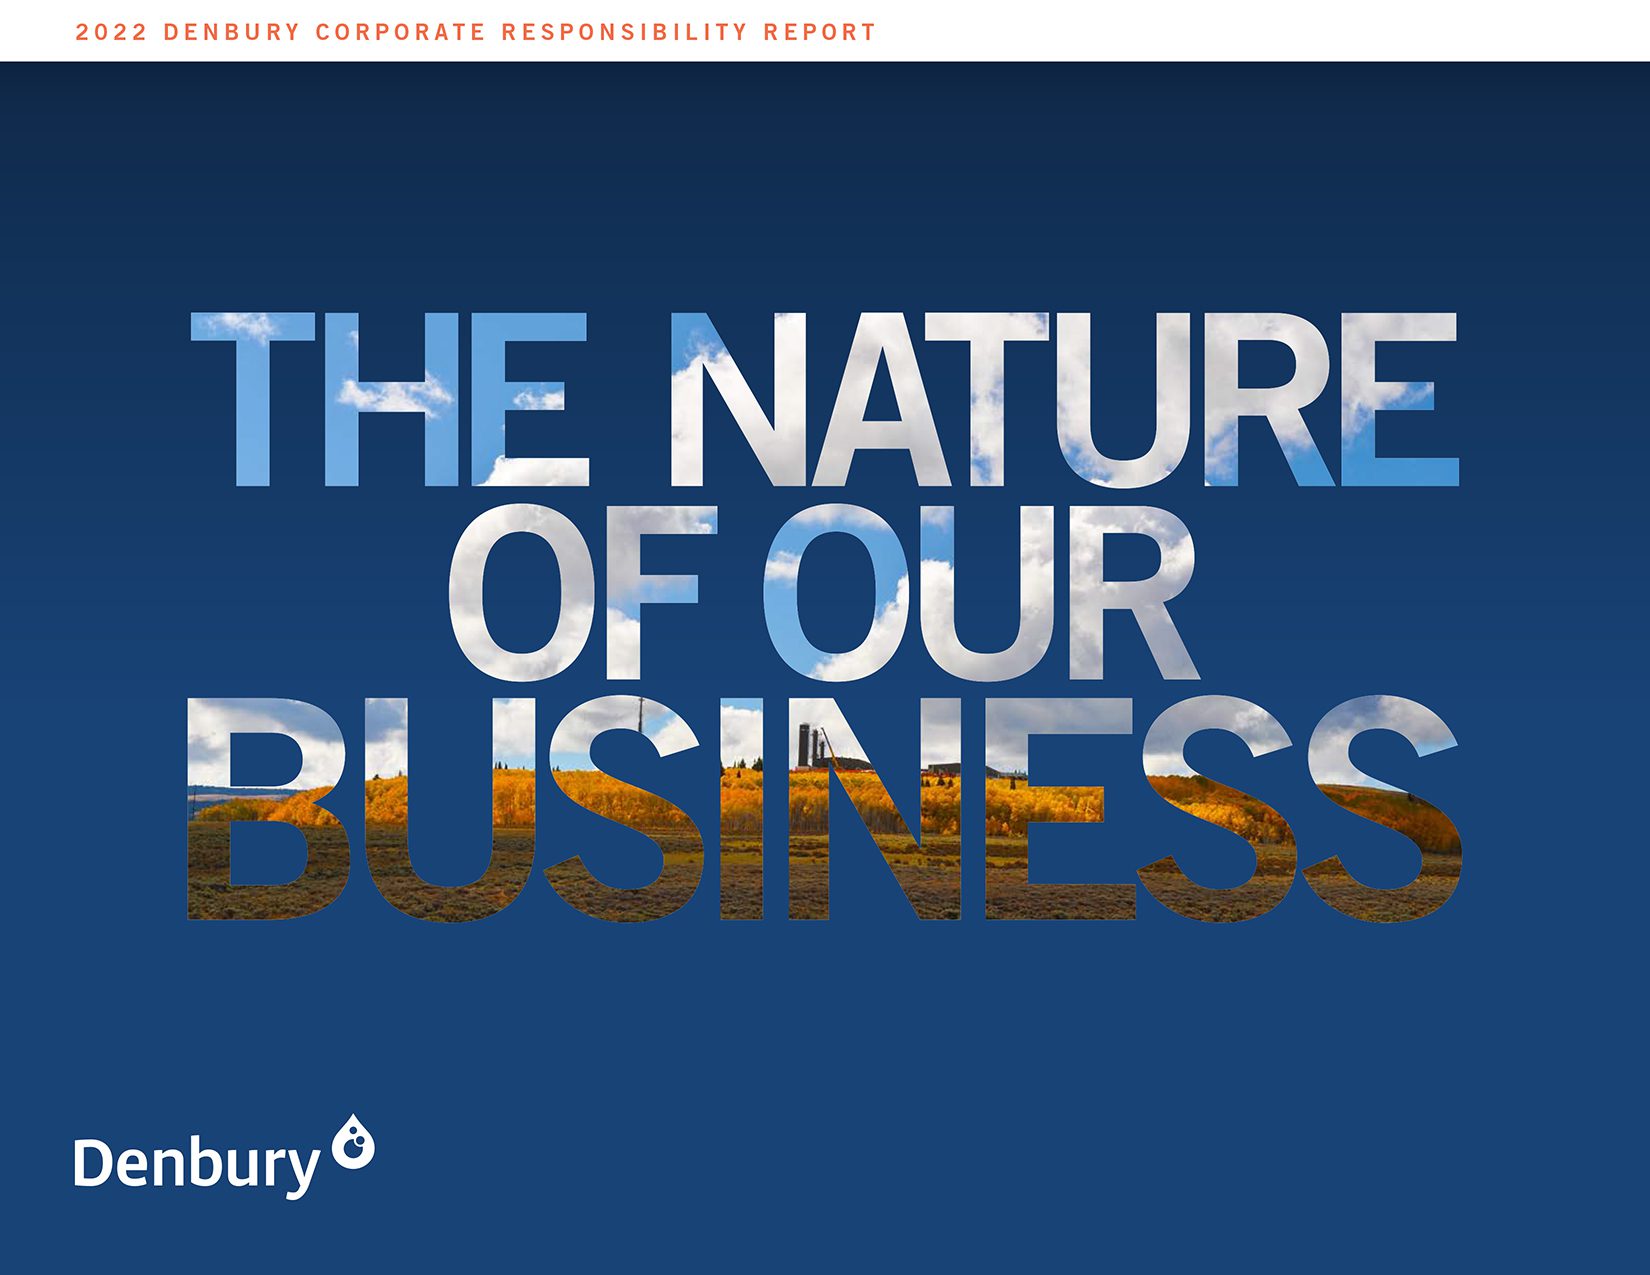 For more information on how Denbury is managing spills and releases, see  our 2022 Corporate Responsibility Report.